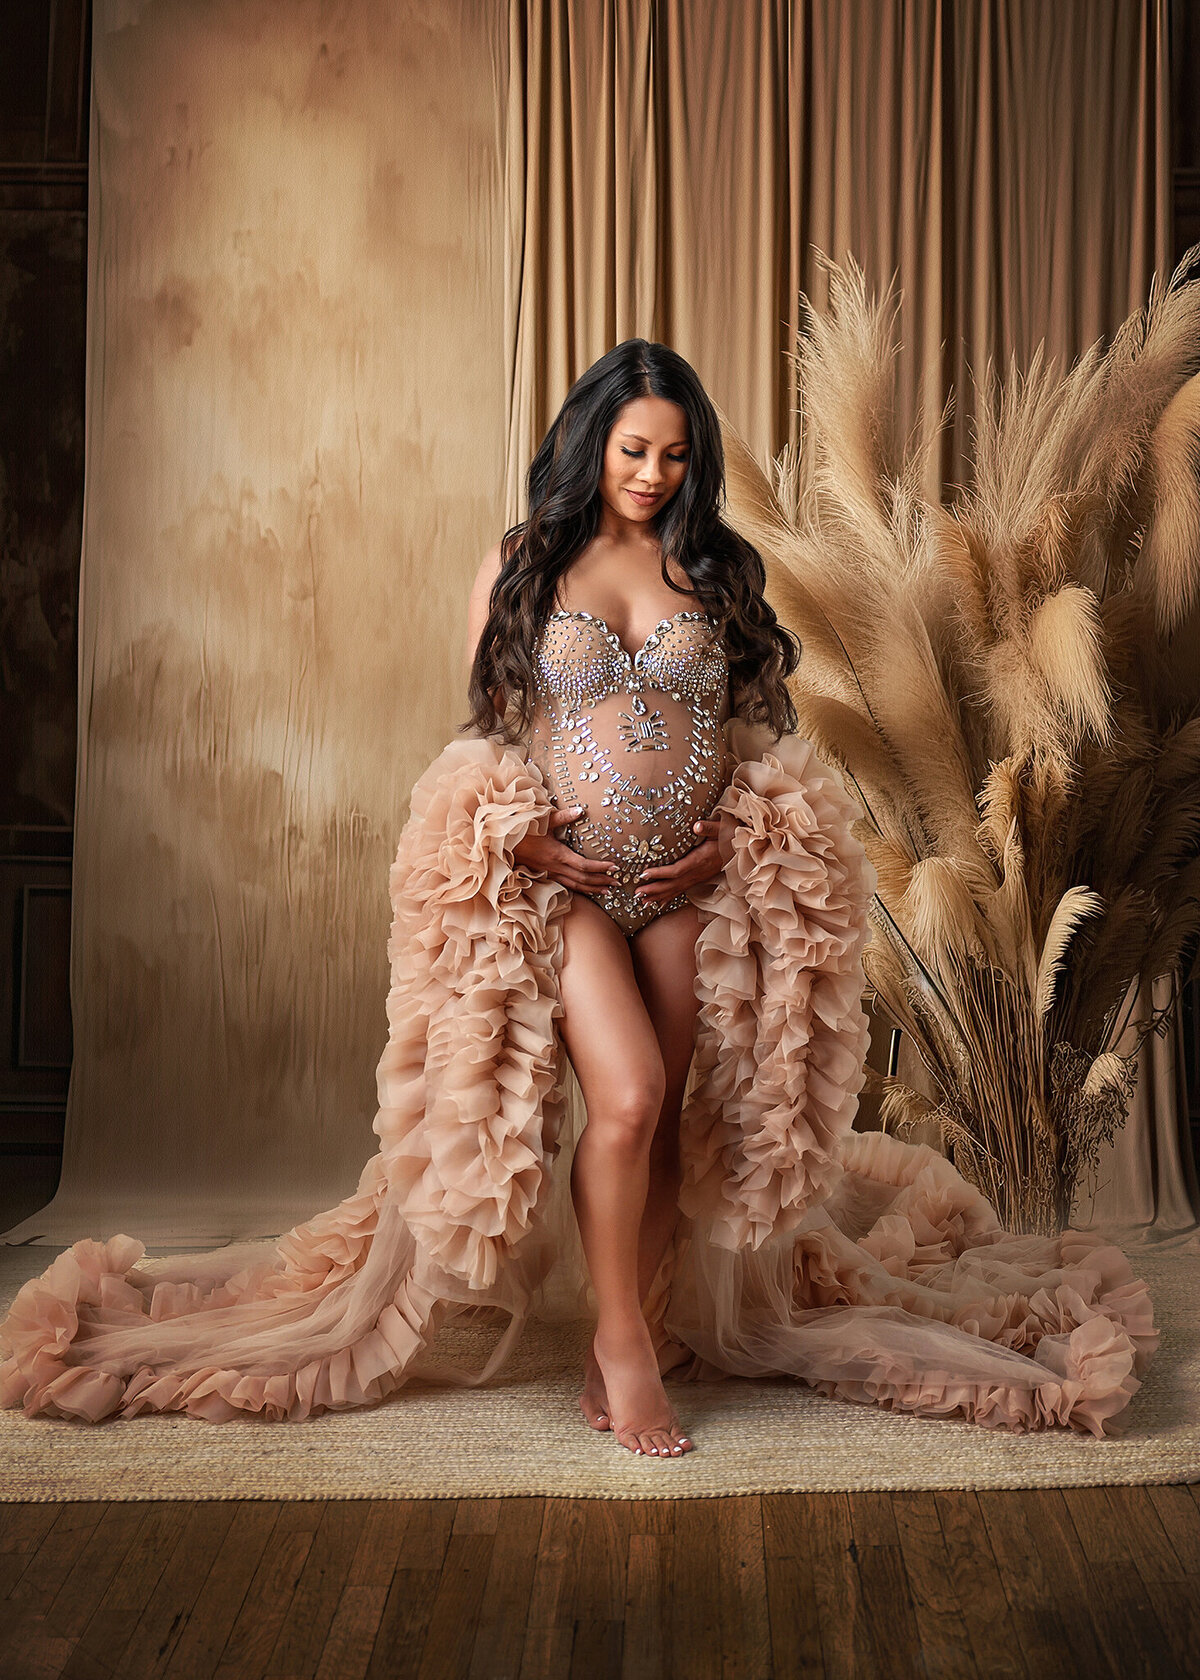 Stunning mom expecting her 1st baby in Phoenix maternity studio, wearing a jeweled bodysuit and fluffy tan robe surrounded by boho decor